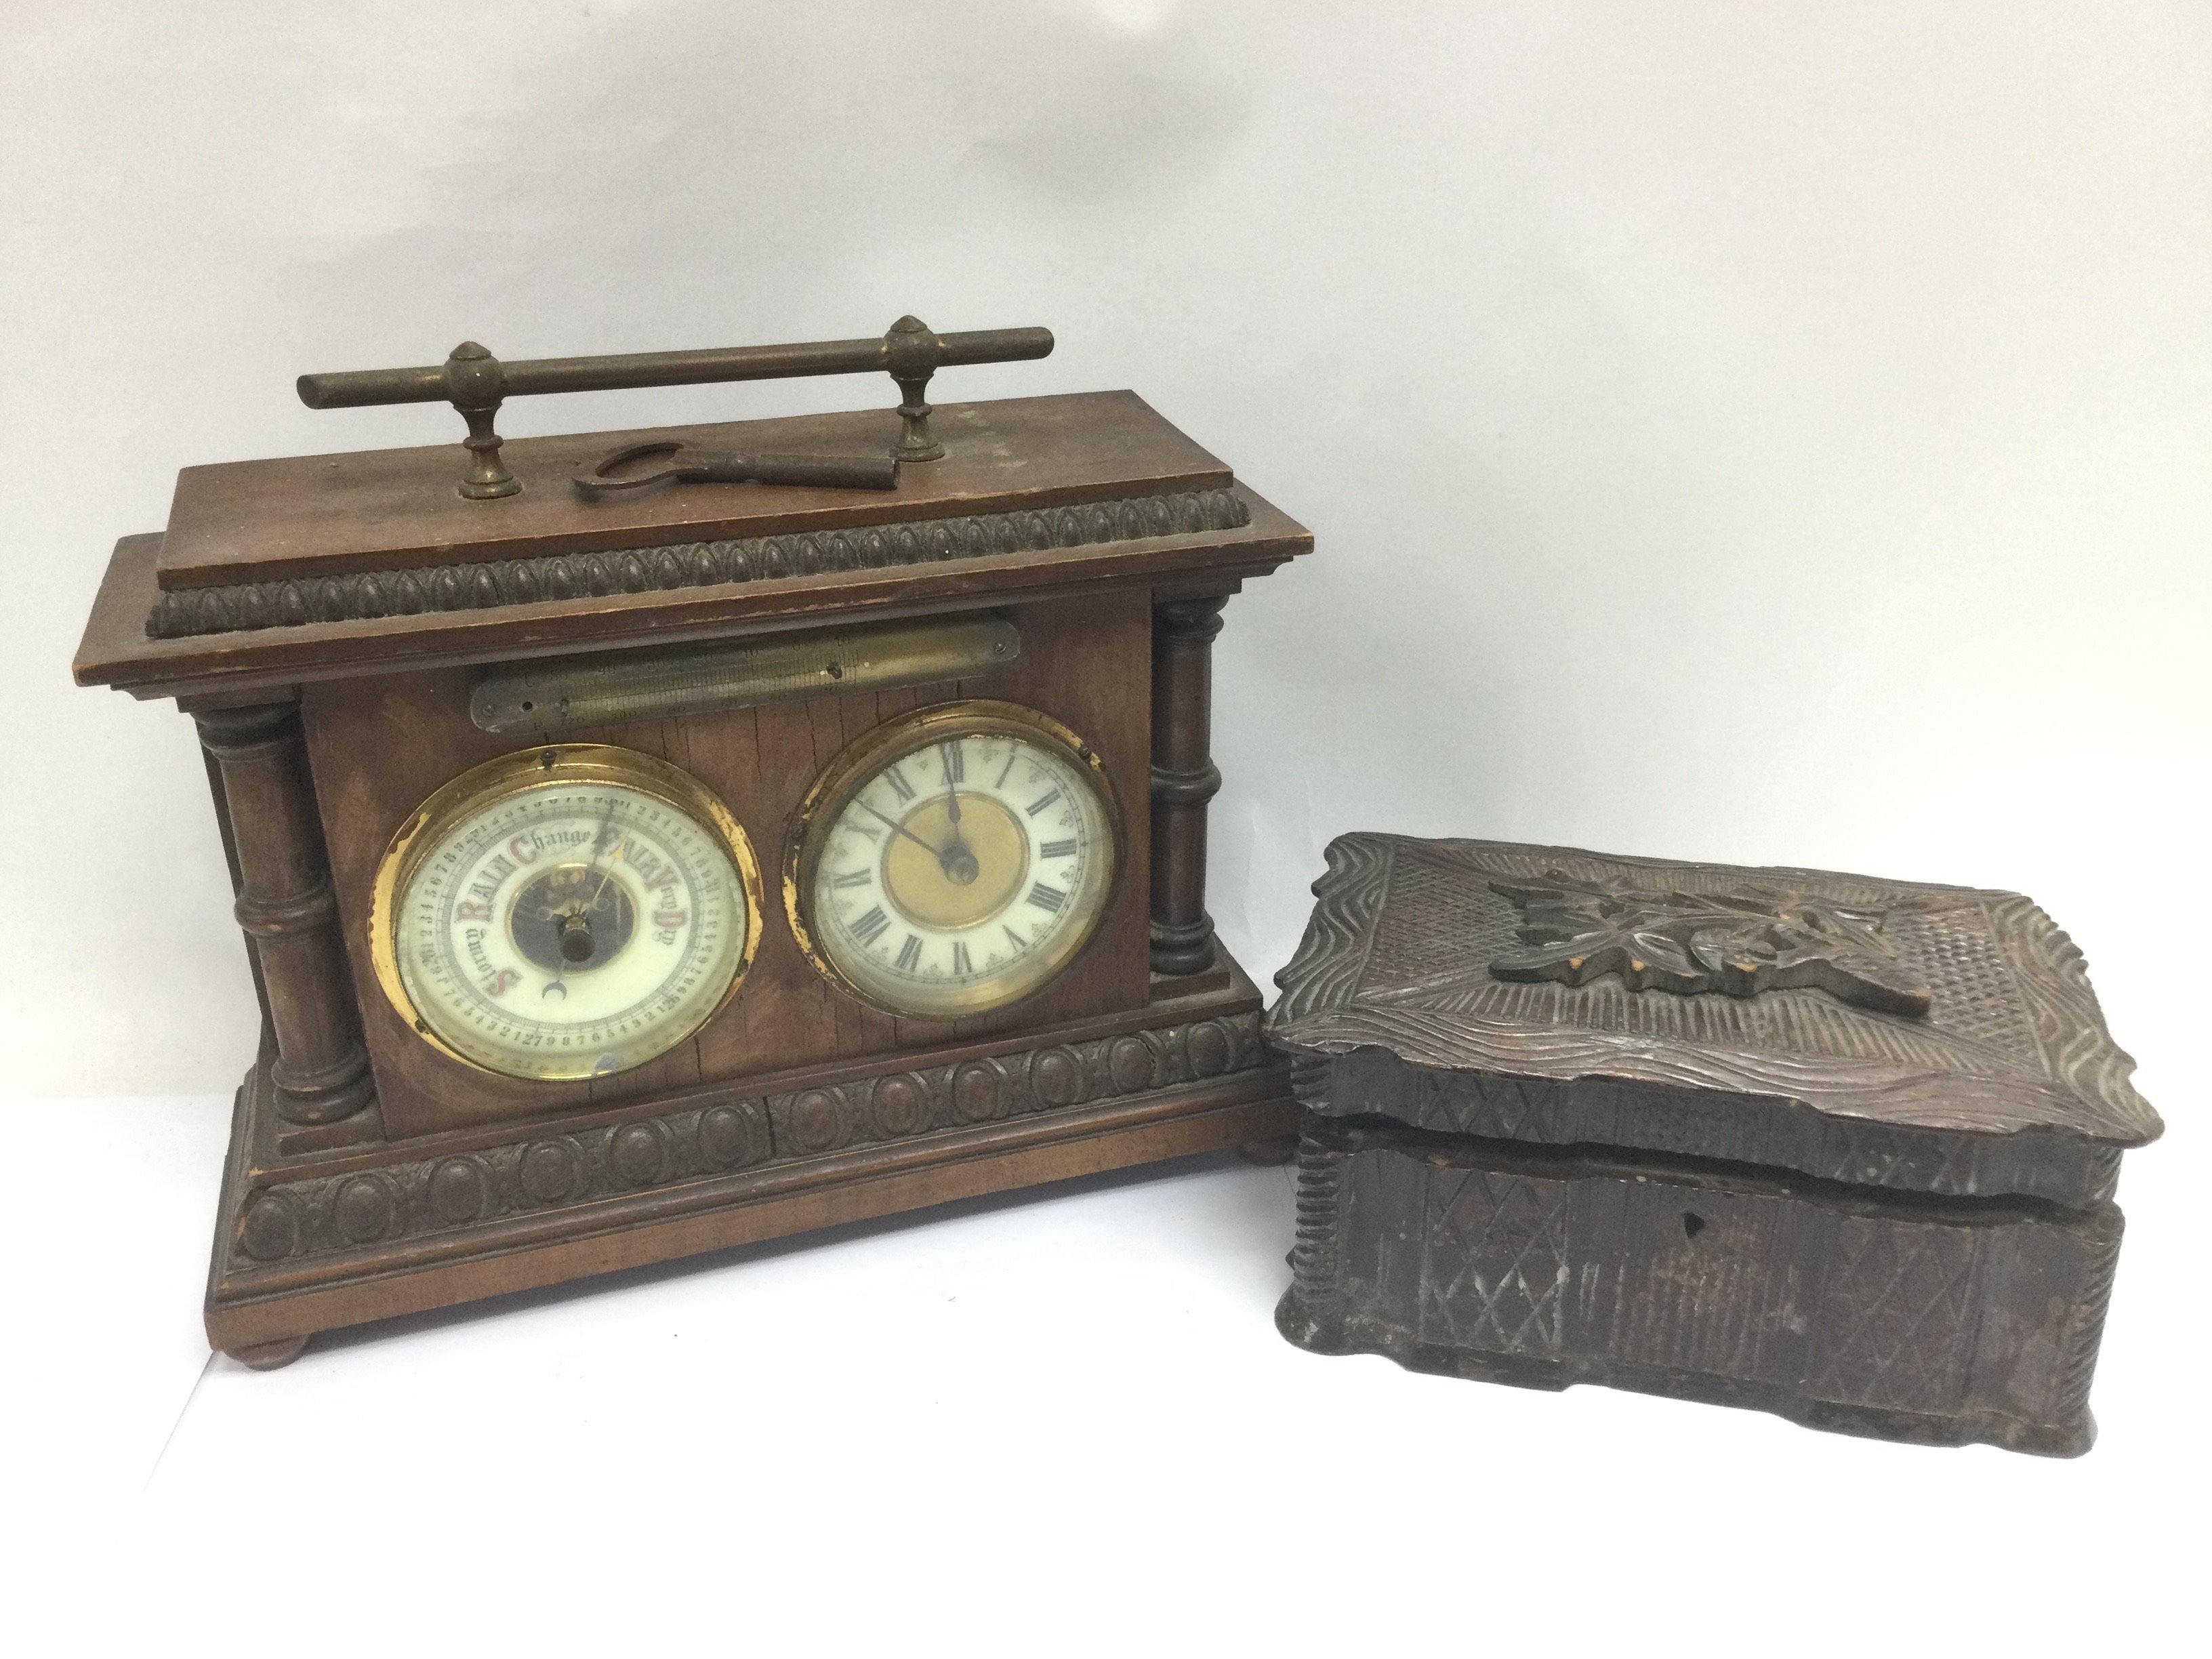 A mahogany cased clock and barometer set together